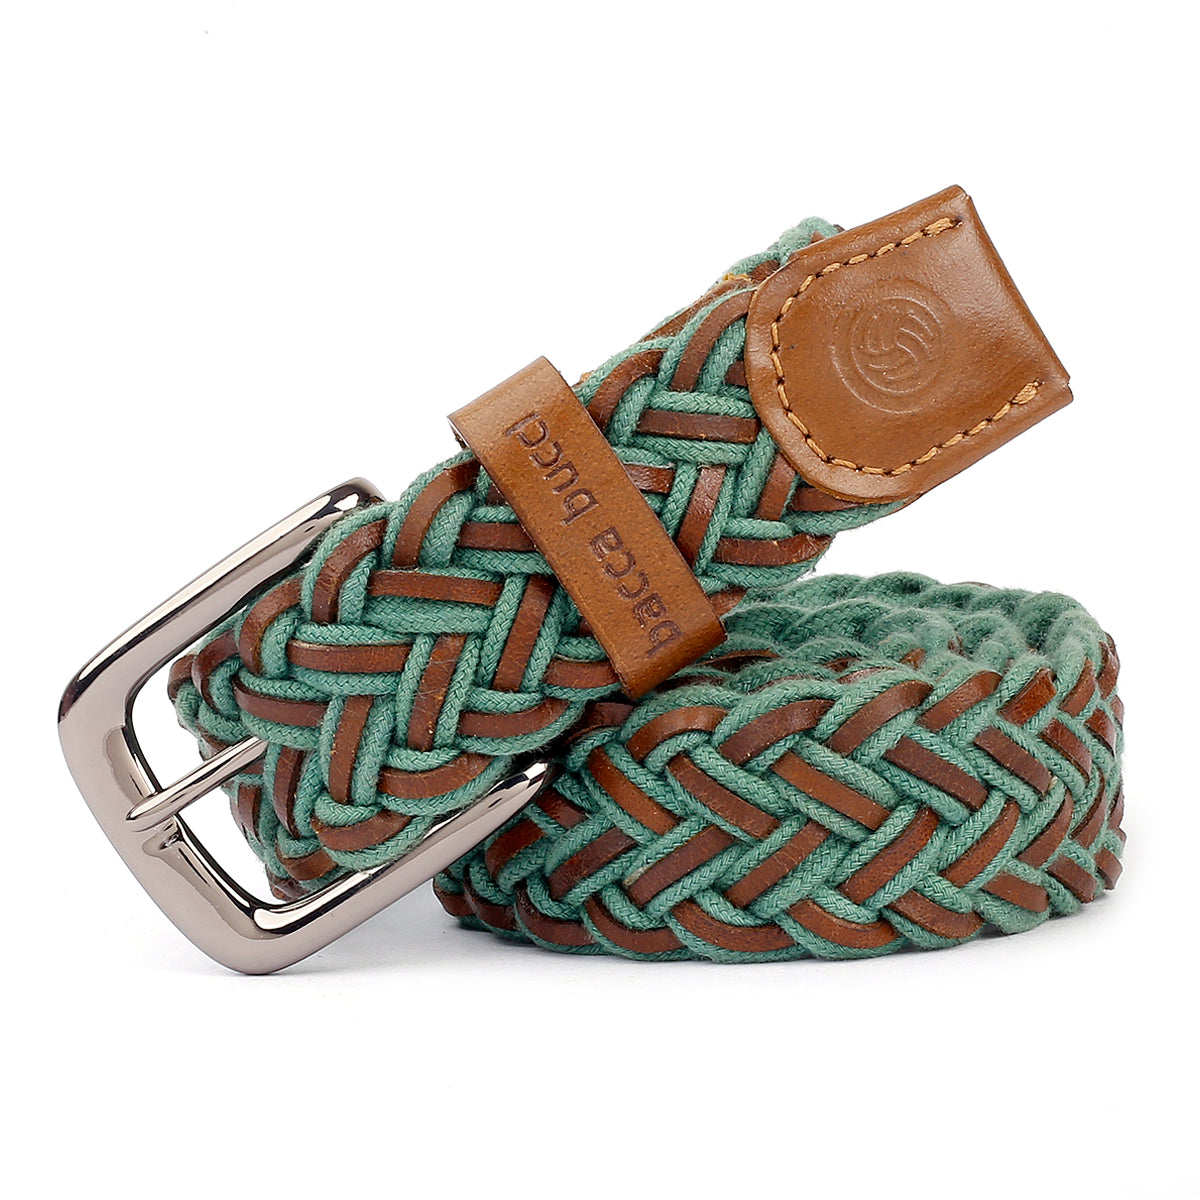 Bacca Bucci Italian Woven leather and Cotton Elastic braided belt for men with Alloy buckle